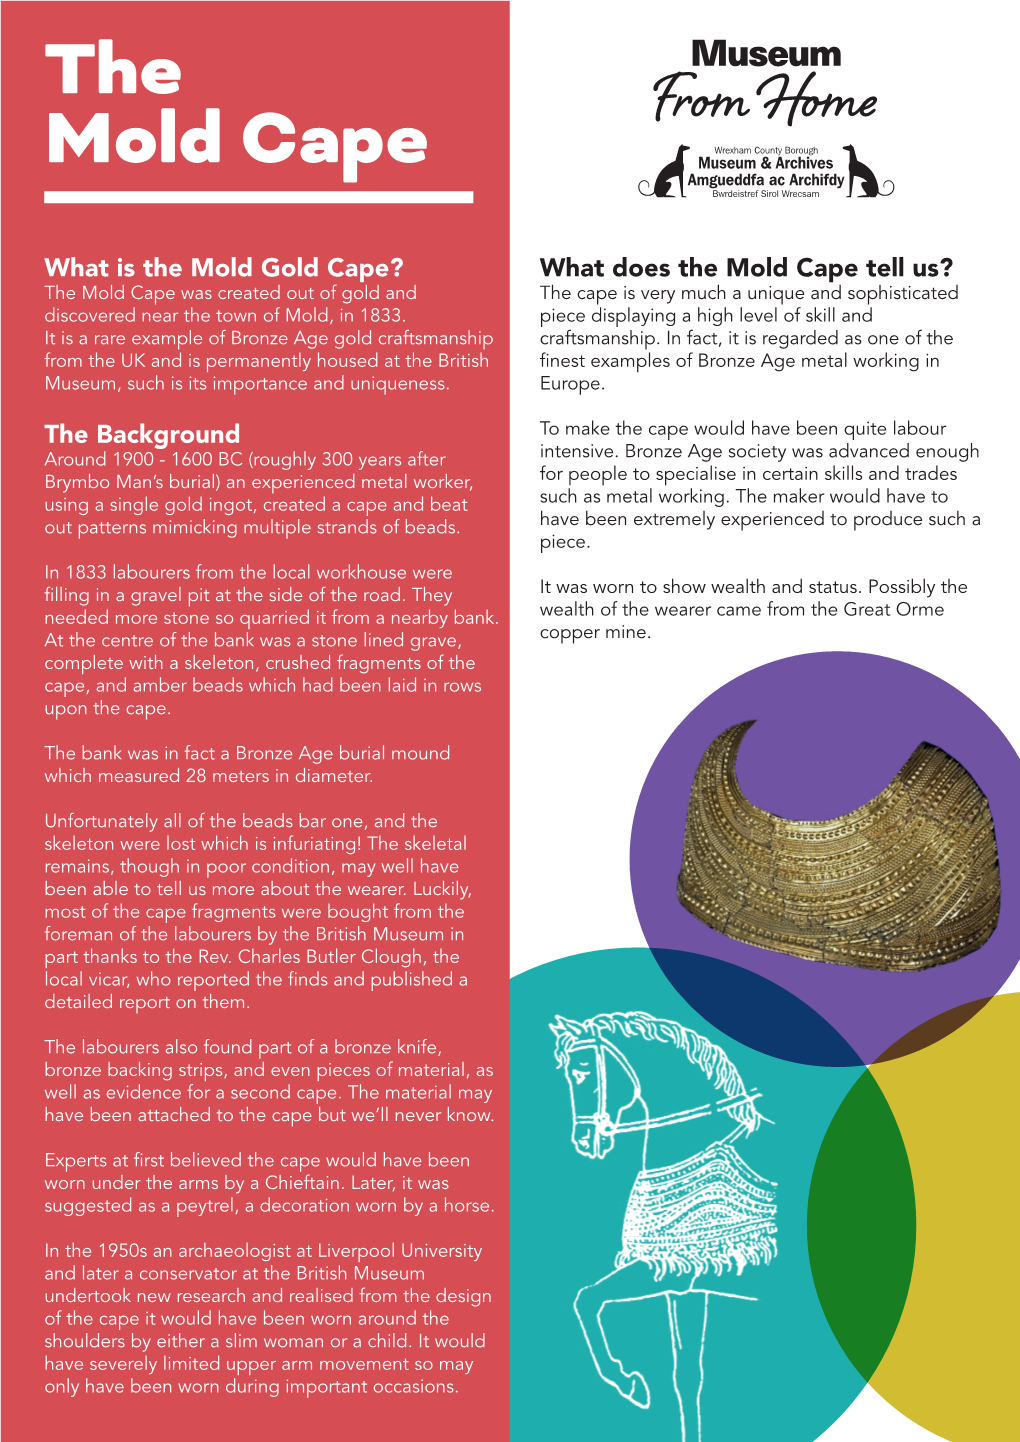 The Mold Cape Tell Us? the Mold Cape Was Created out of Gold and the Cape Is Very Much a Unique and Sophisticated Discovered Near the Town of Mold, in 1833